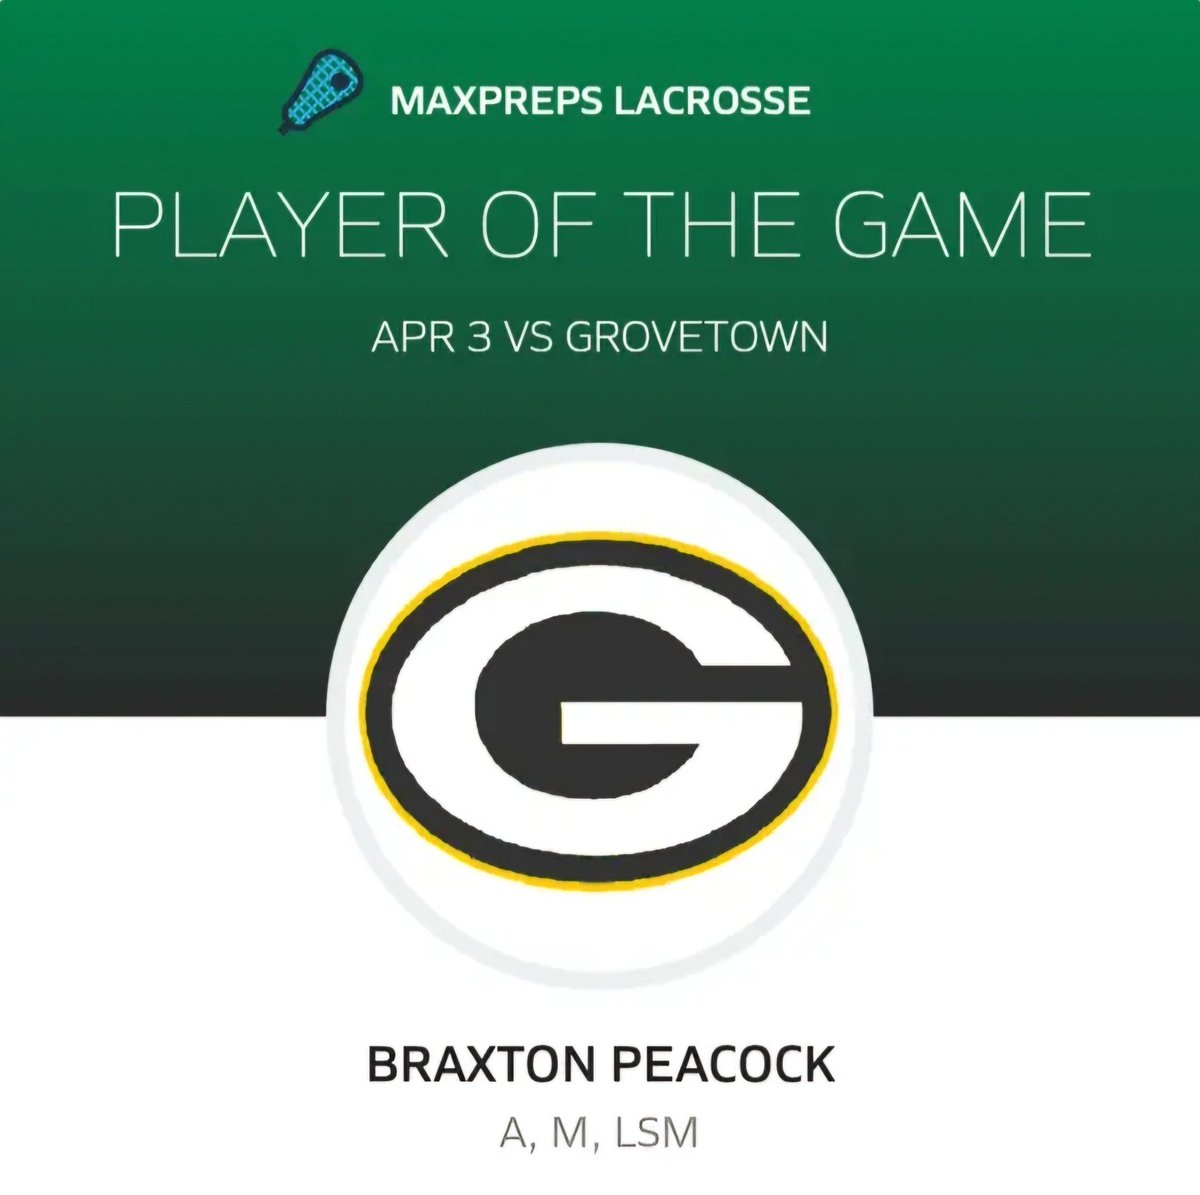 Congratulations to @PeacockBraxton for being named the @MaxPreps Player of The Game. Braxton had 2 Goals, 4 Assists, 5 Ground Balls & 1 Takeaway against Grovetown on 4/3. @CreswellCurtis @CheneyAUG @OfficialGHSA